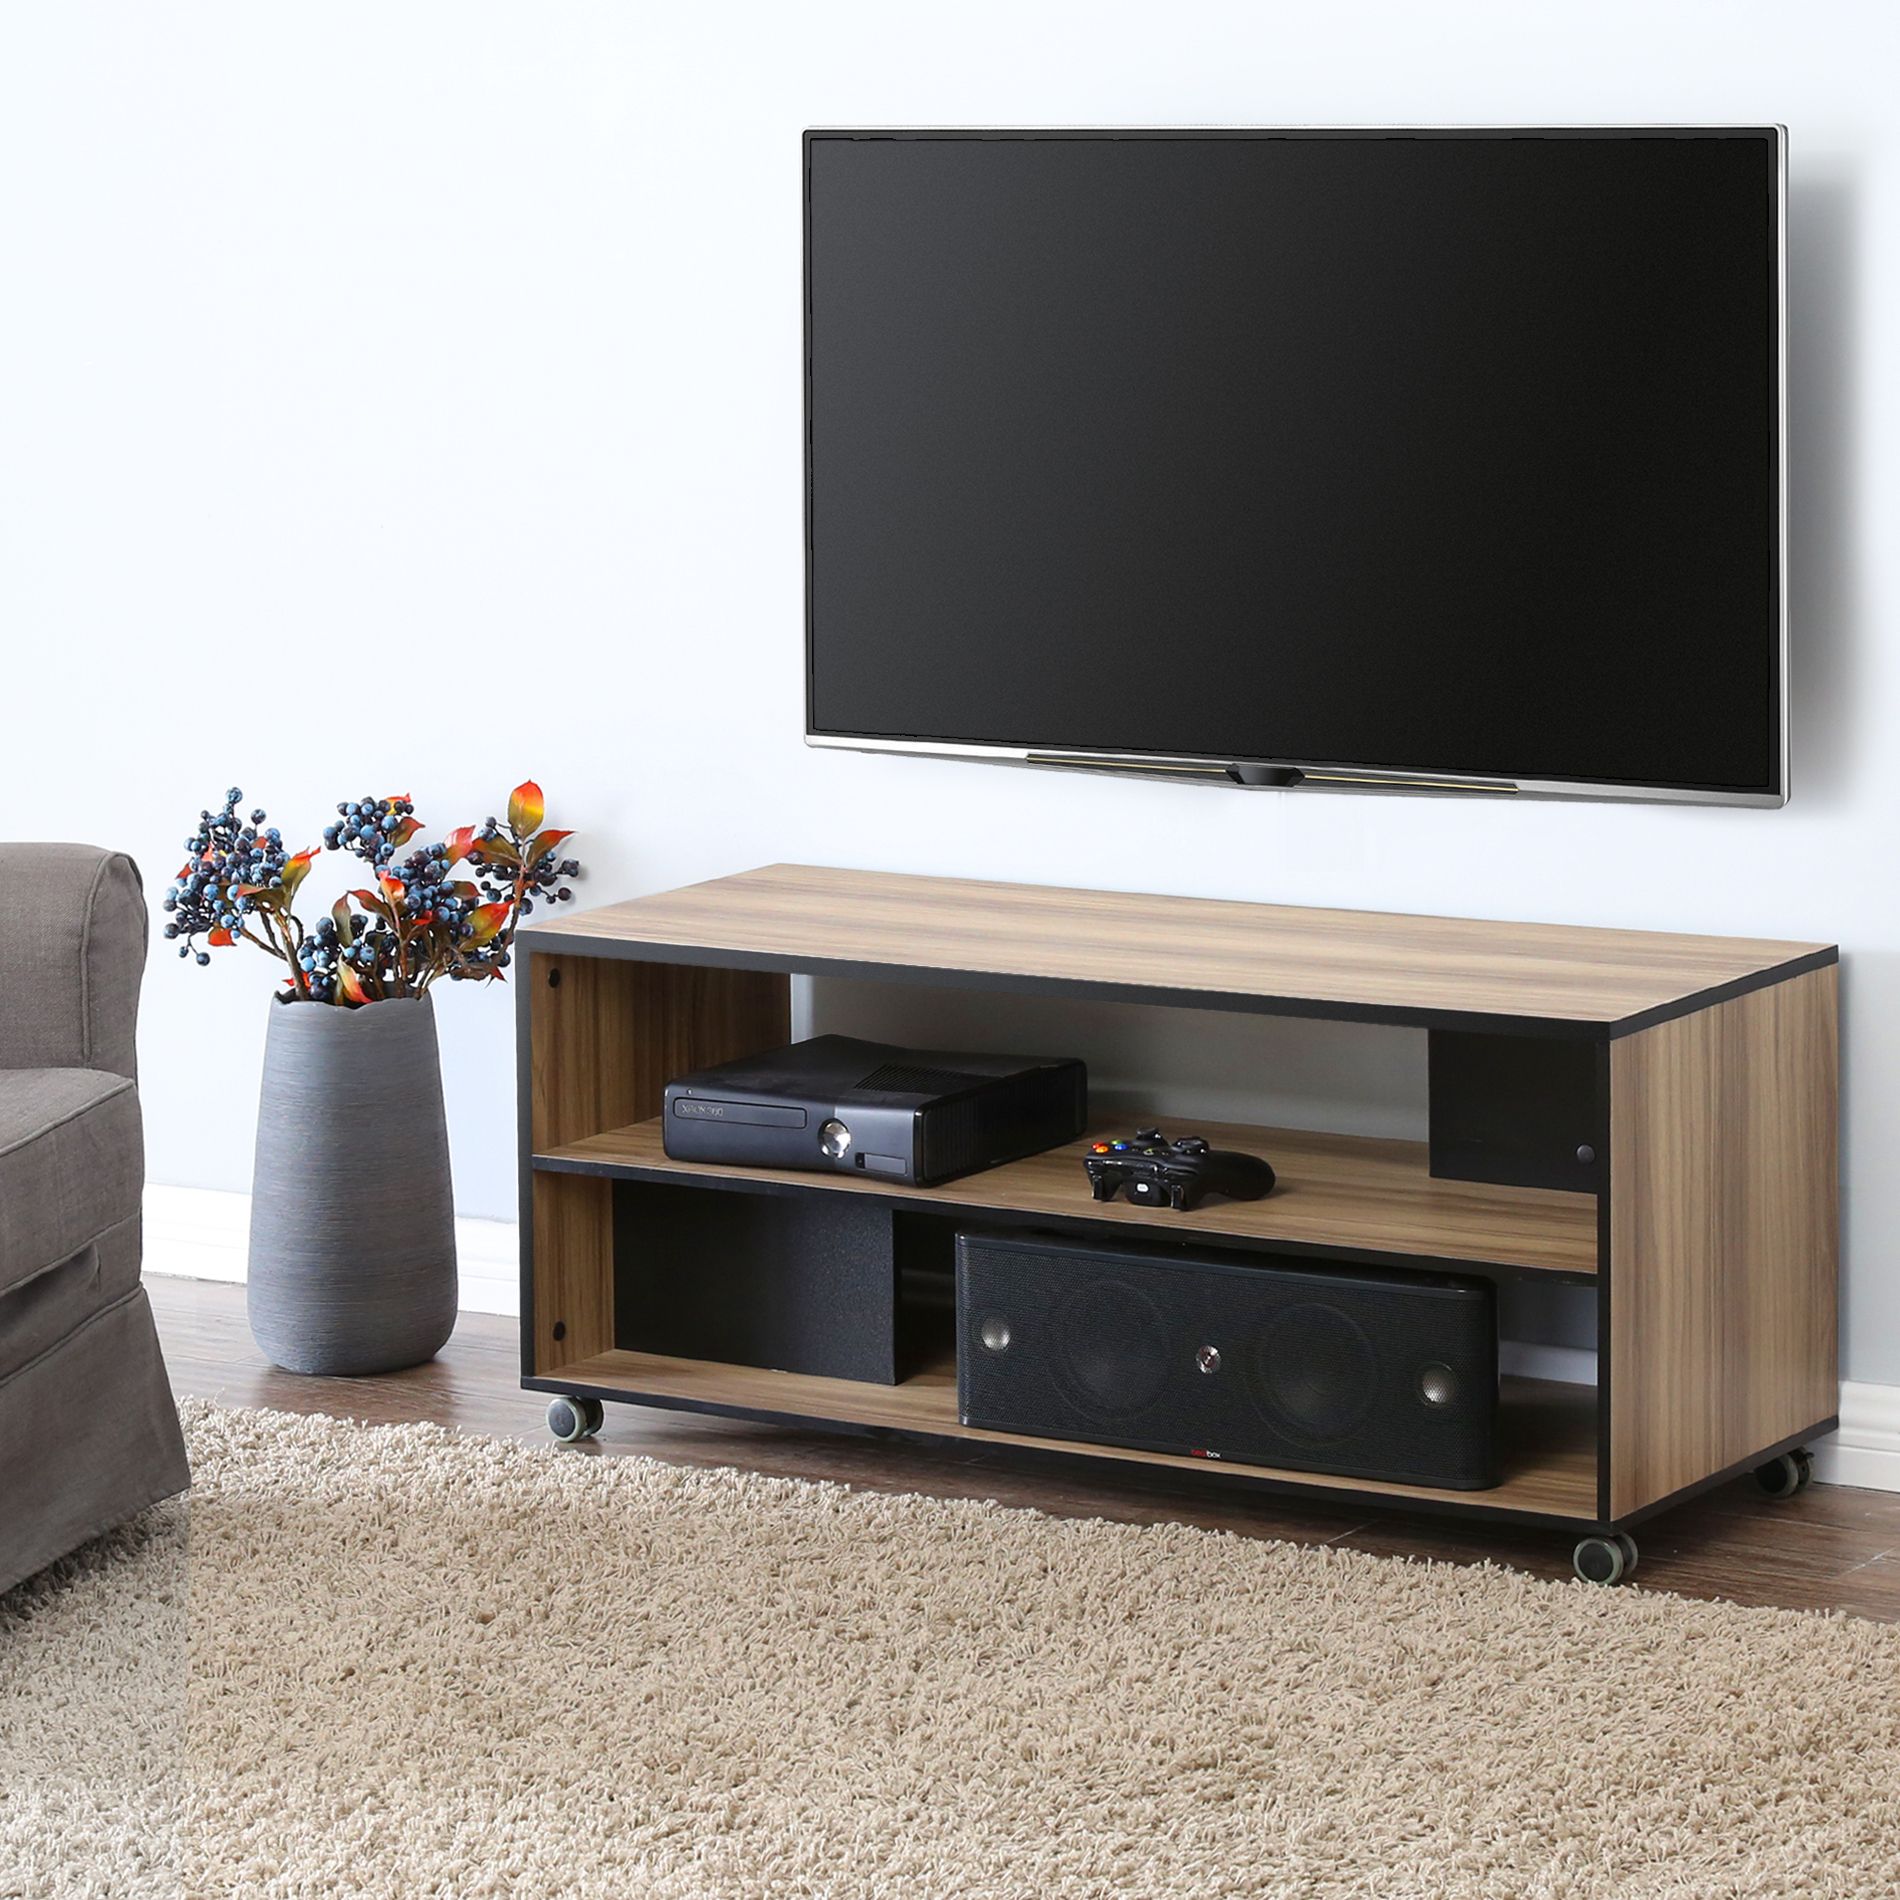 Fitueyes Wood Tv Stand Storage Console With Wheels For 23 Pertaining To Wooden Tv Stands (View 13 of 15)